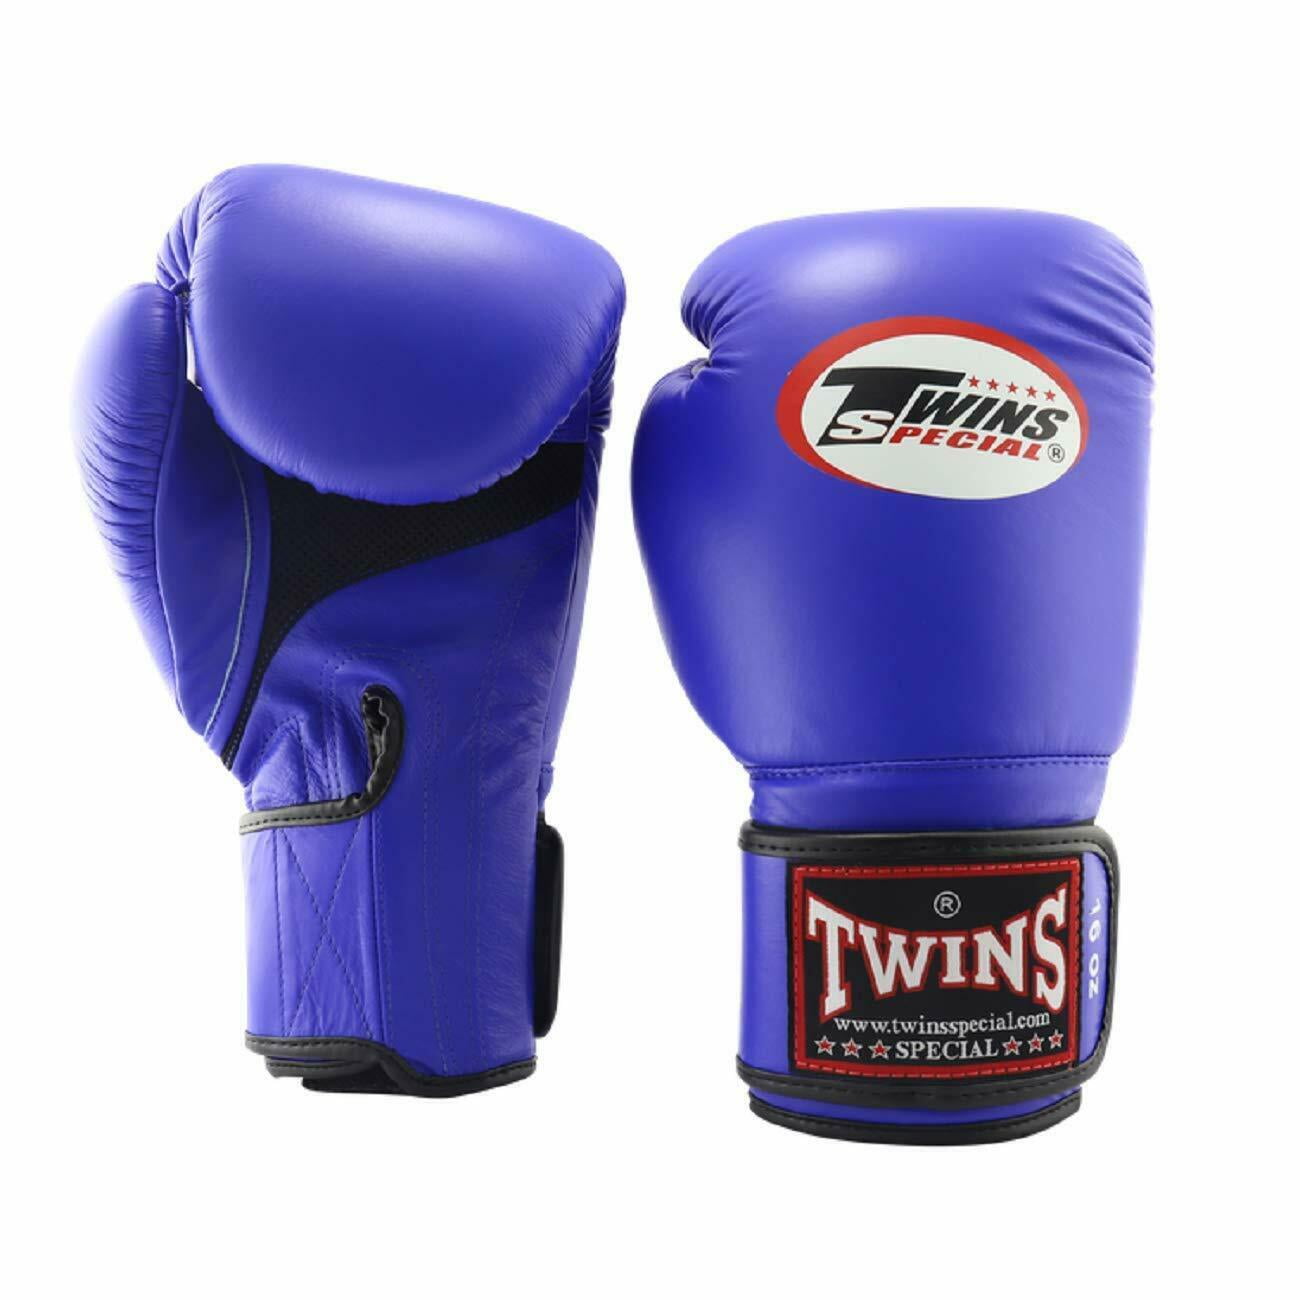 Twins Boxing Gloves Special Blue Muay Thai BGVL-3 